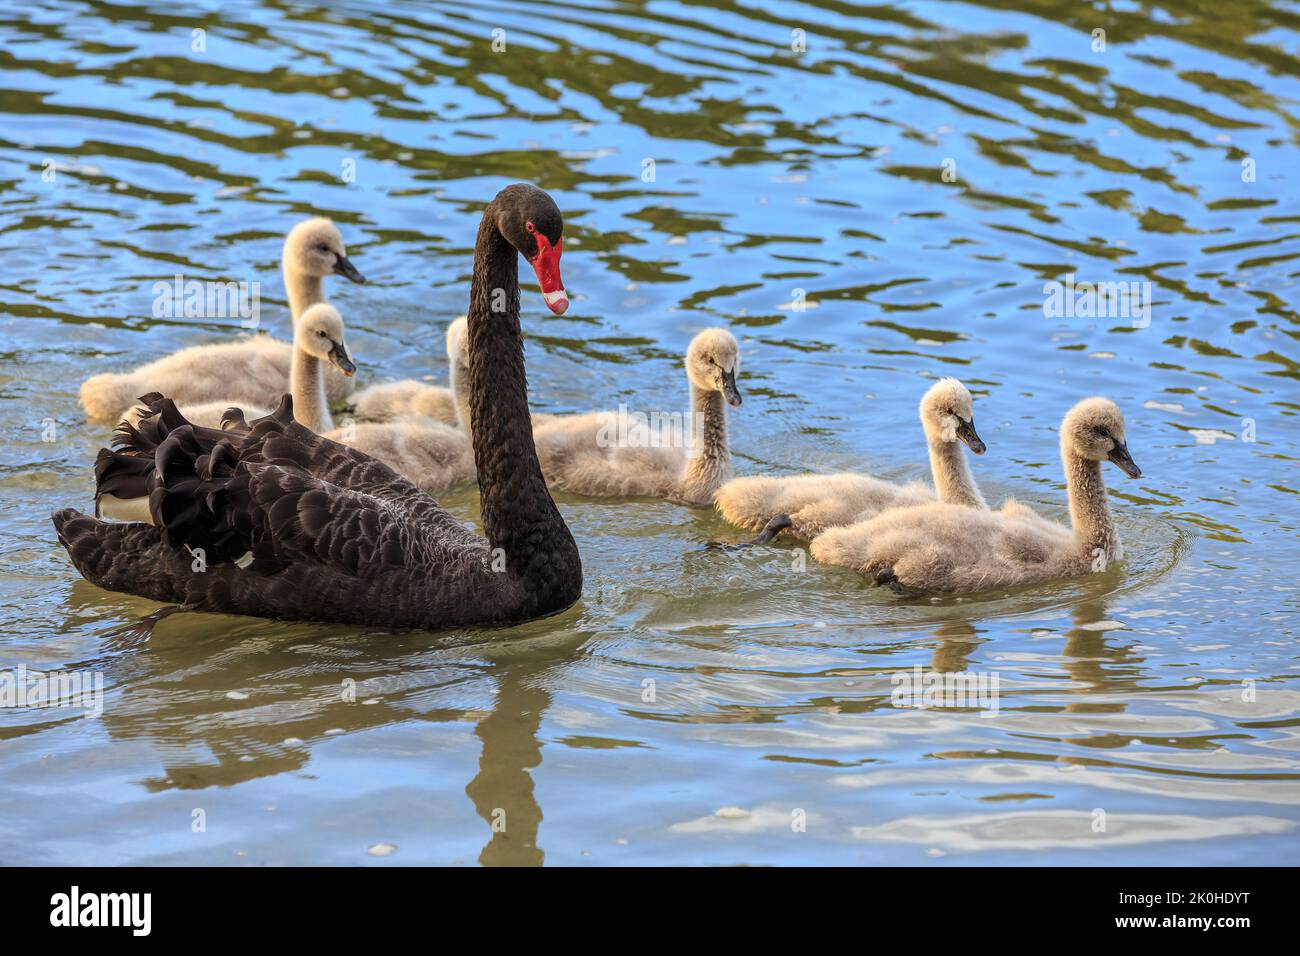 A black swan swimming on a lake, with her family of fluffy cygnets alongside her Stock Photo